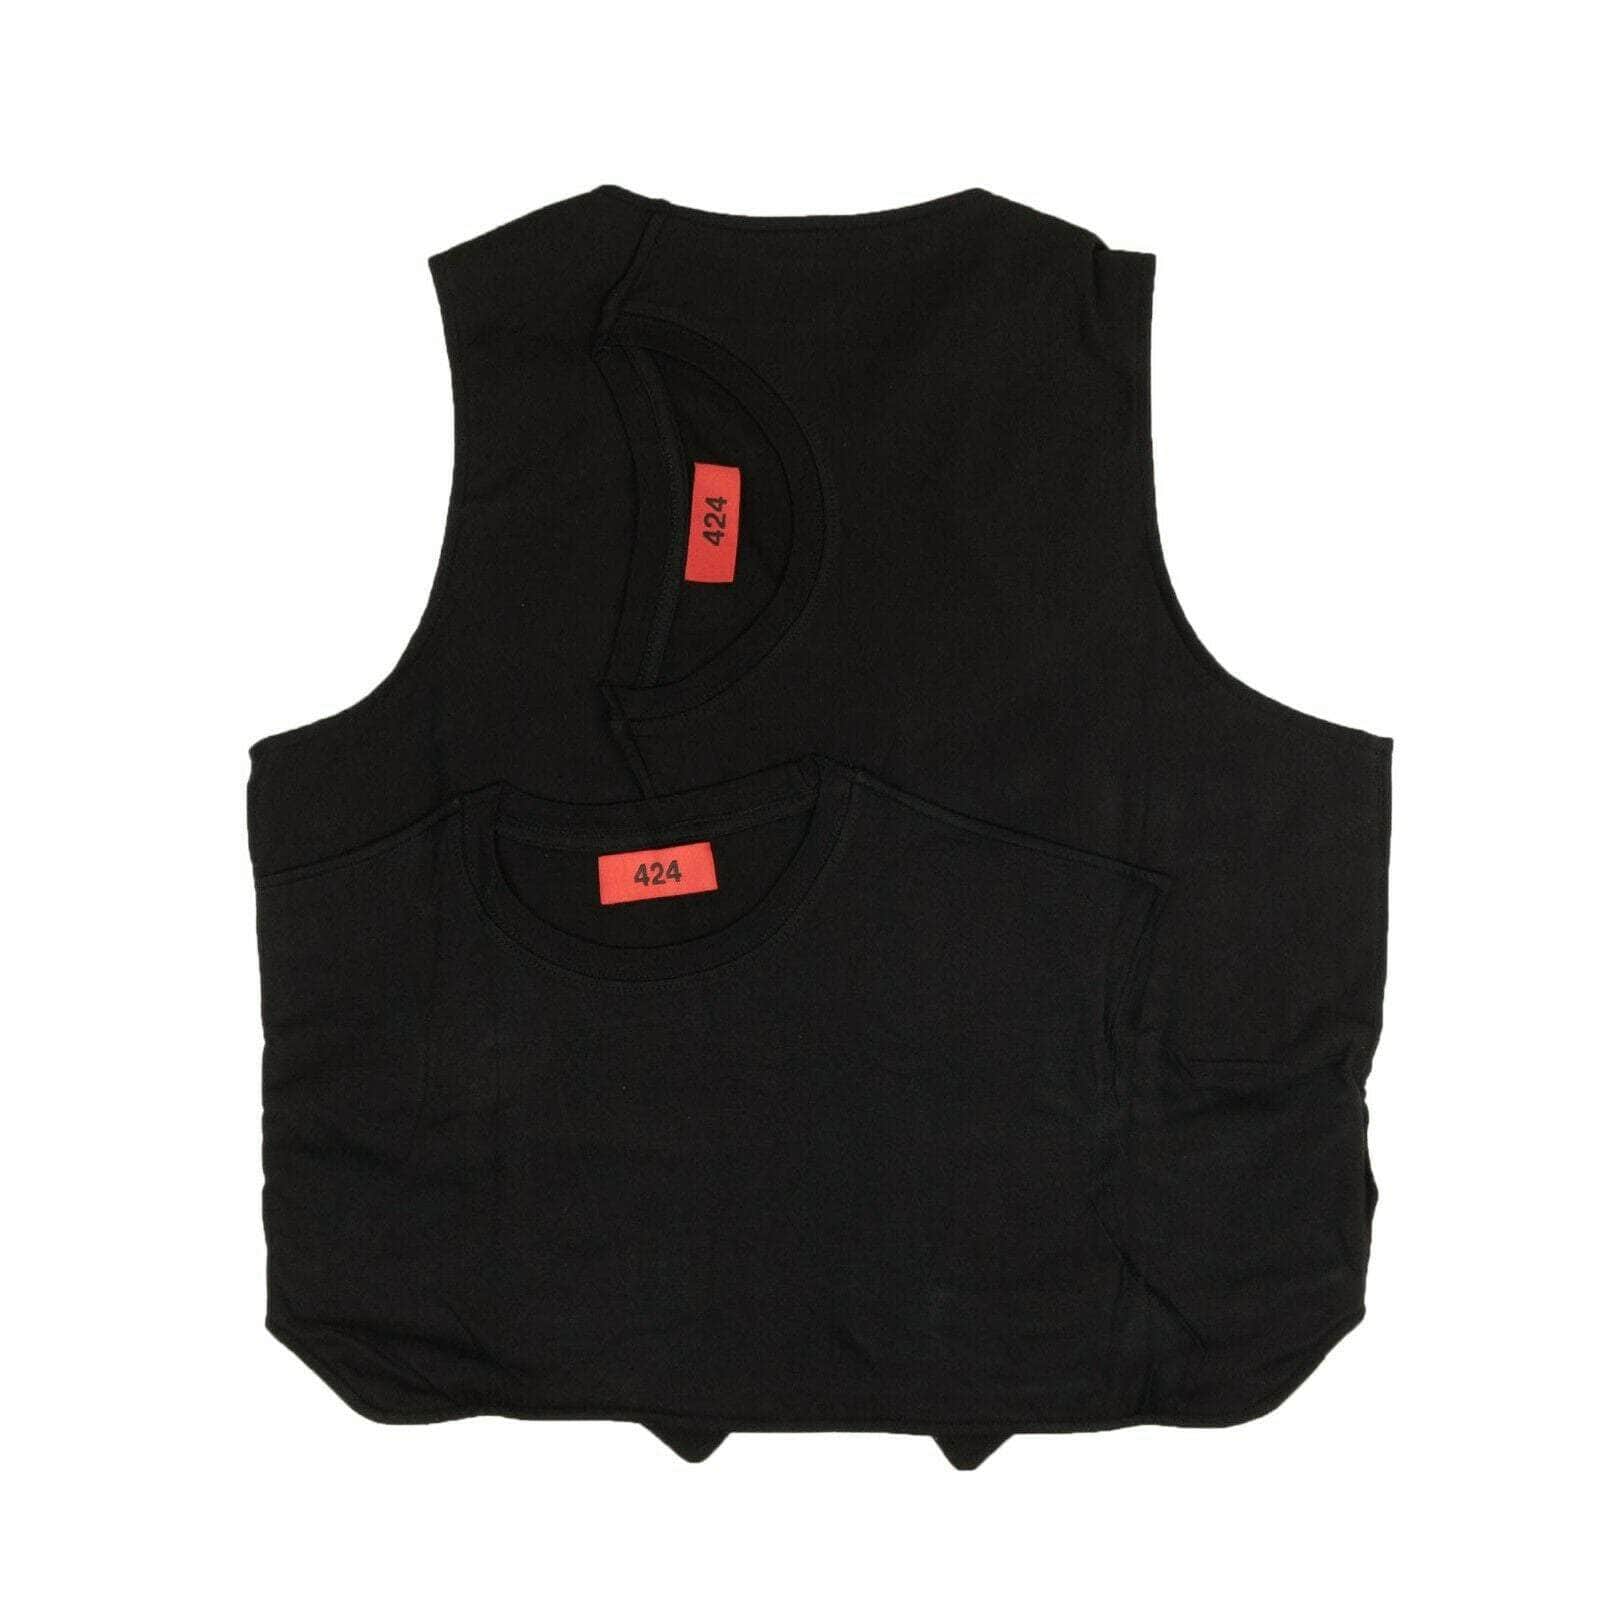 424 ON FAIRFAX 424-on-fairfax, 500-750, channelenable-all, chicmi, couponcollection, gender-mens, main-clothing, mens-outerwear-vests, mens-shoes, size-l, size-m Black Logo Patch Outerwear Vest